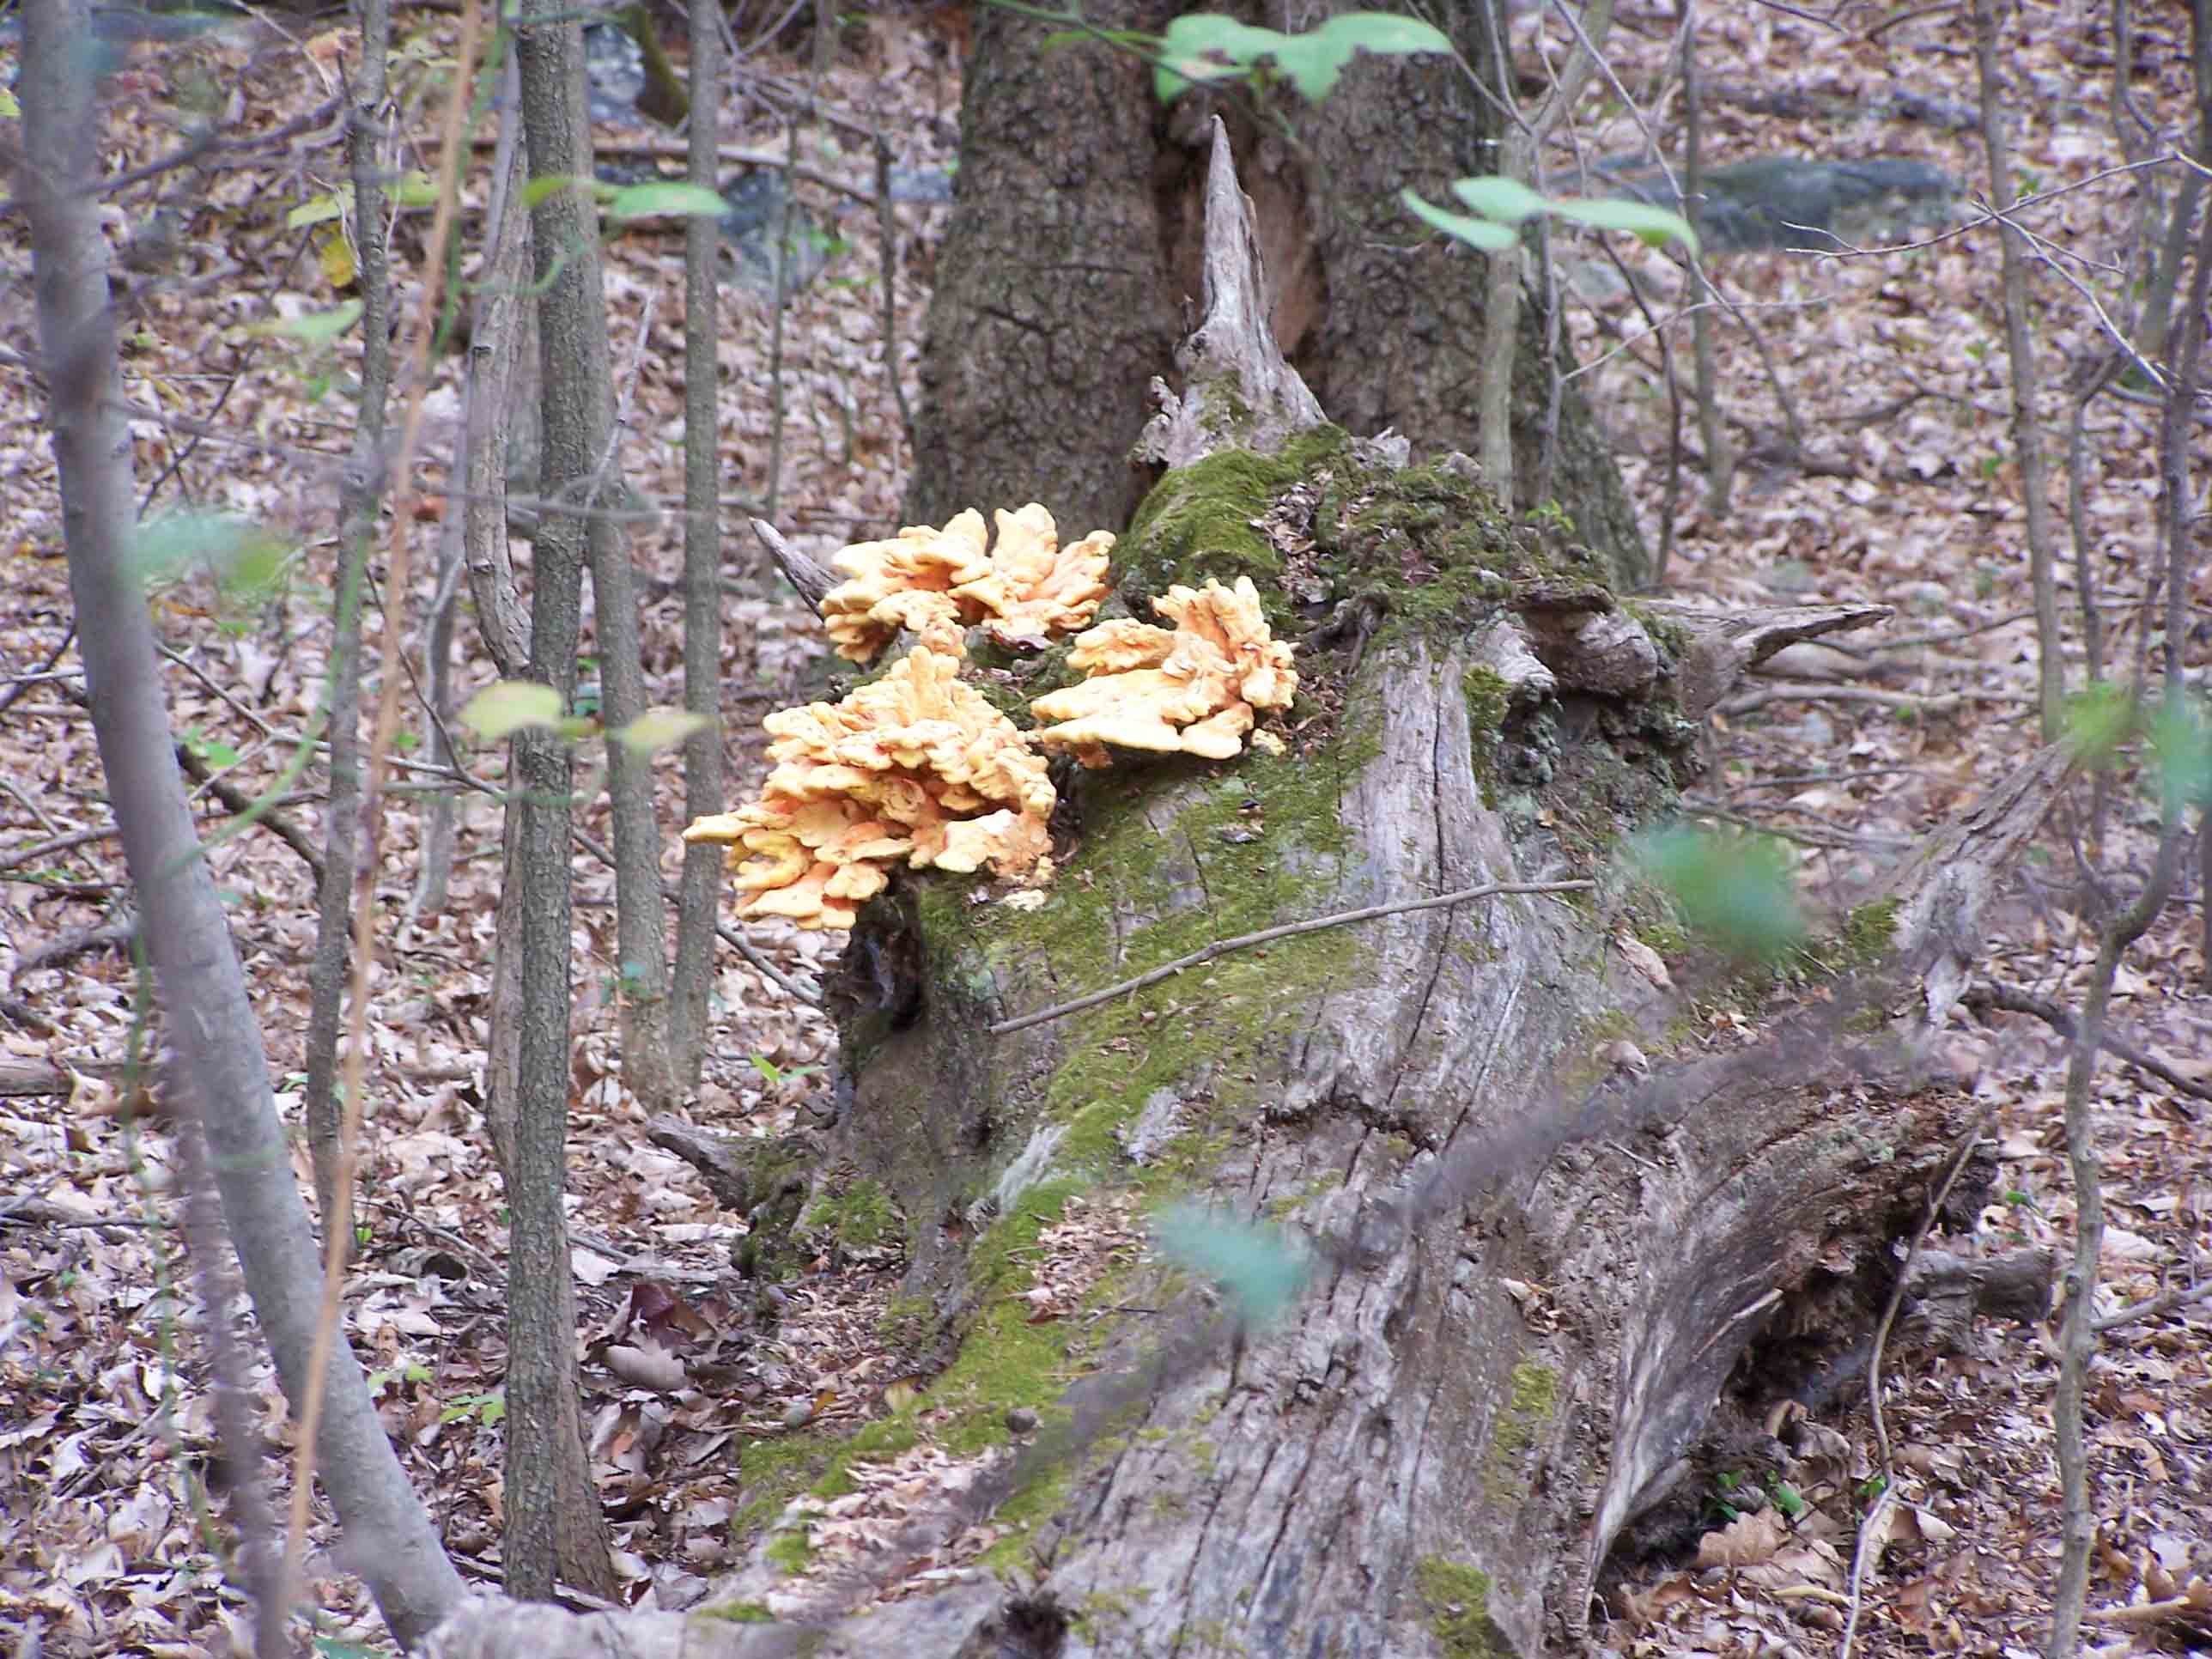 Brightly colored fungus along trail. Courtesy at@rohland.org